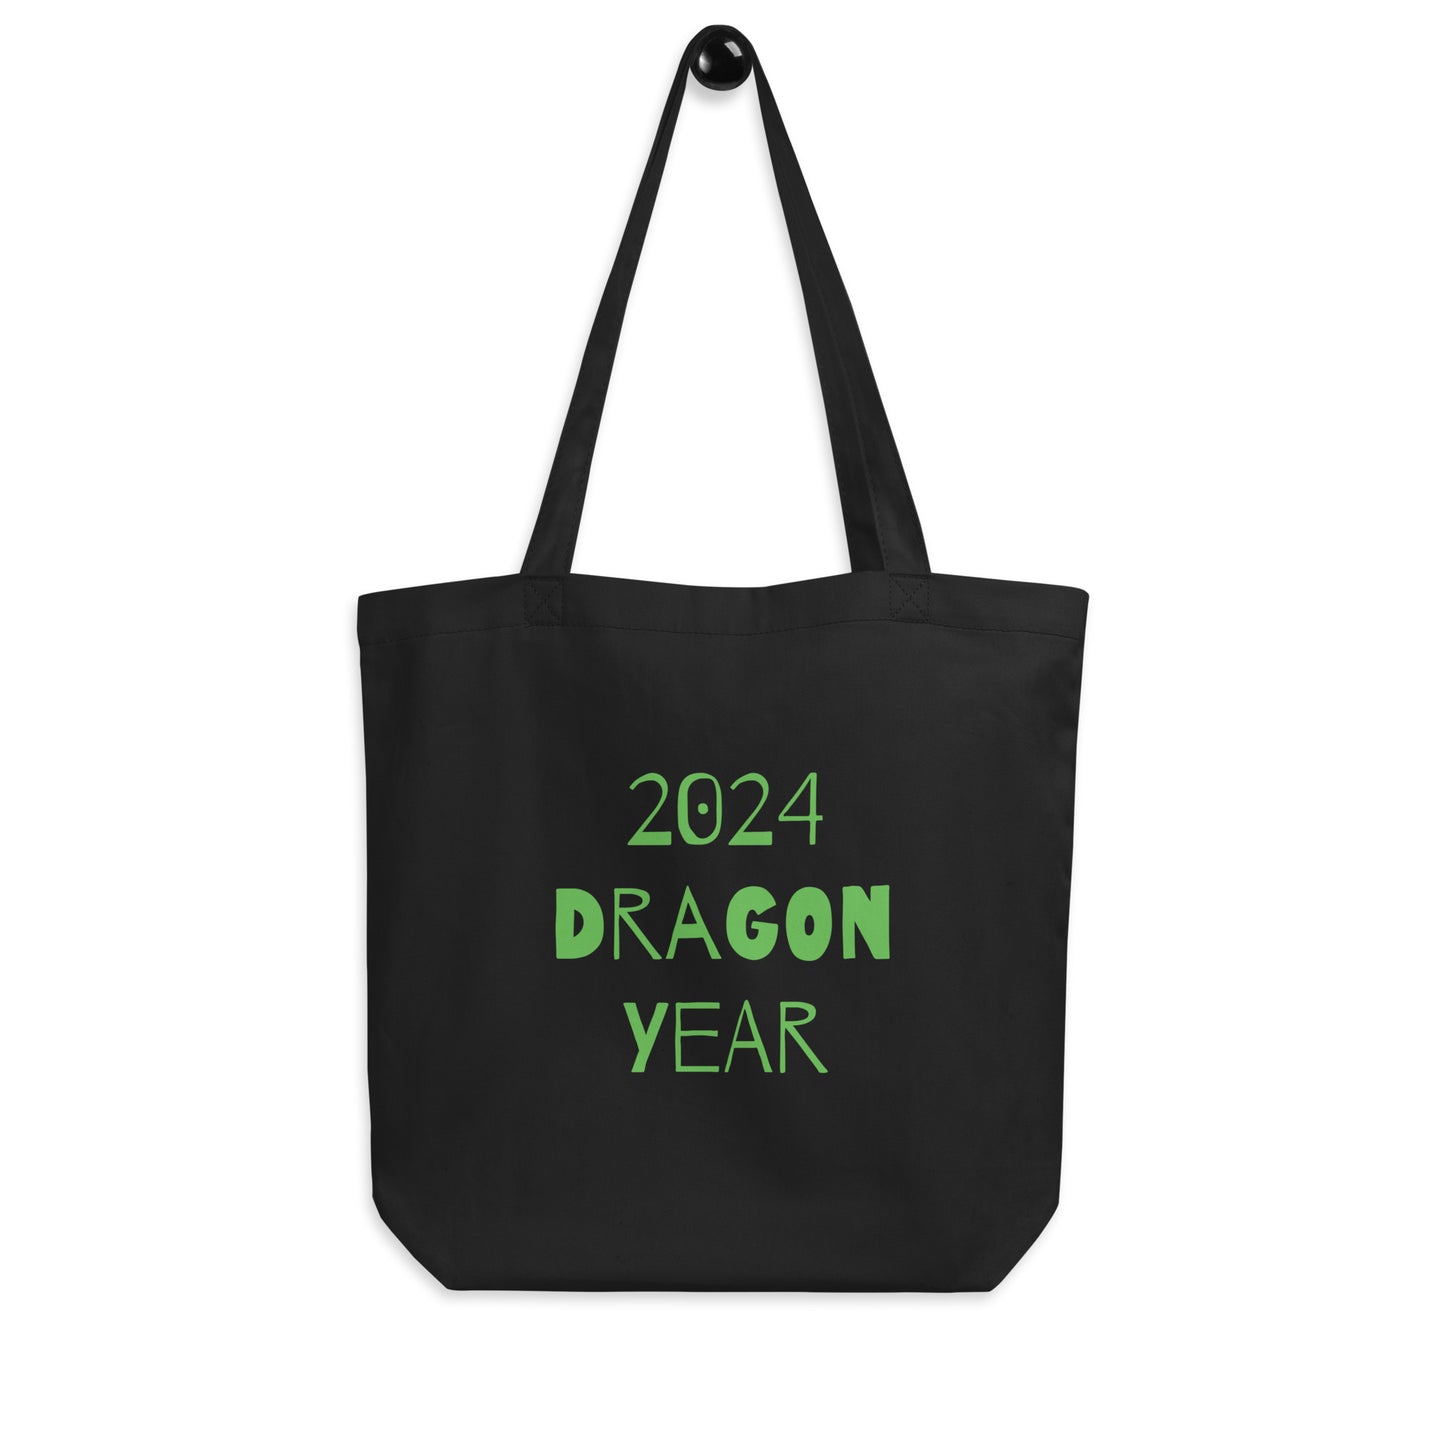 Personalised Eco Tote Bag with Funny Green Dragons, symbol of 2024 year